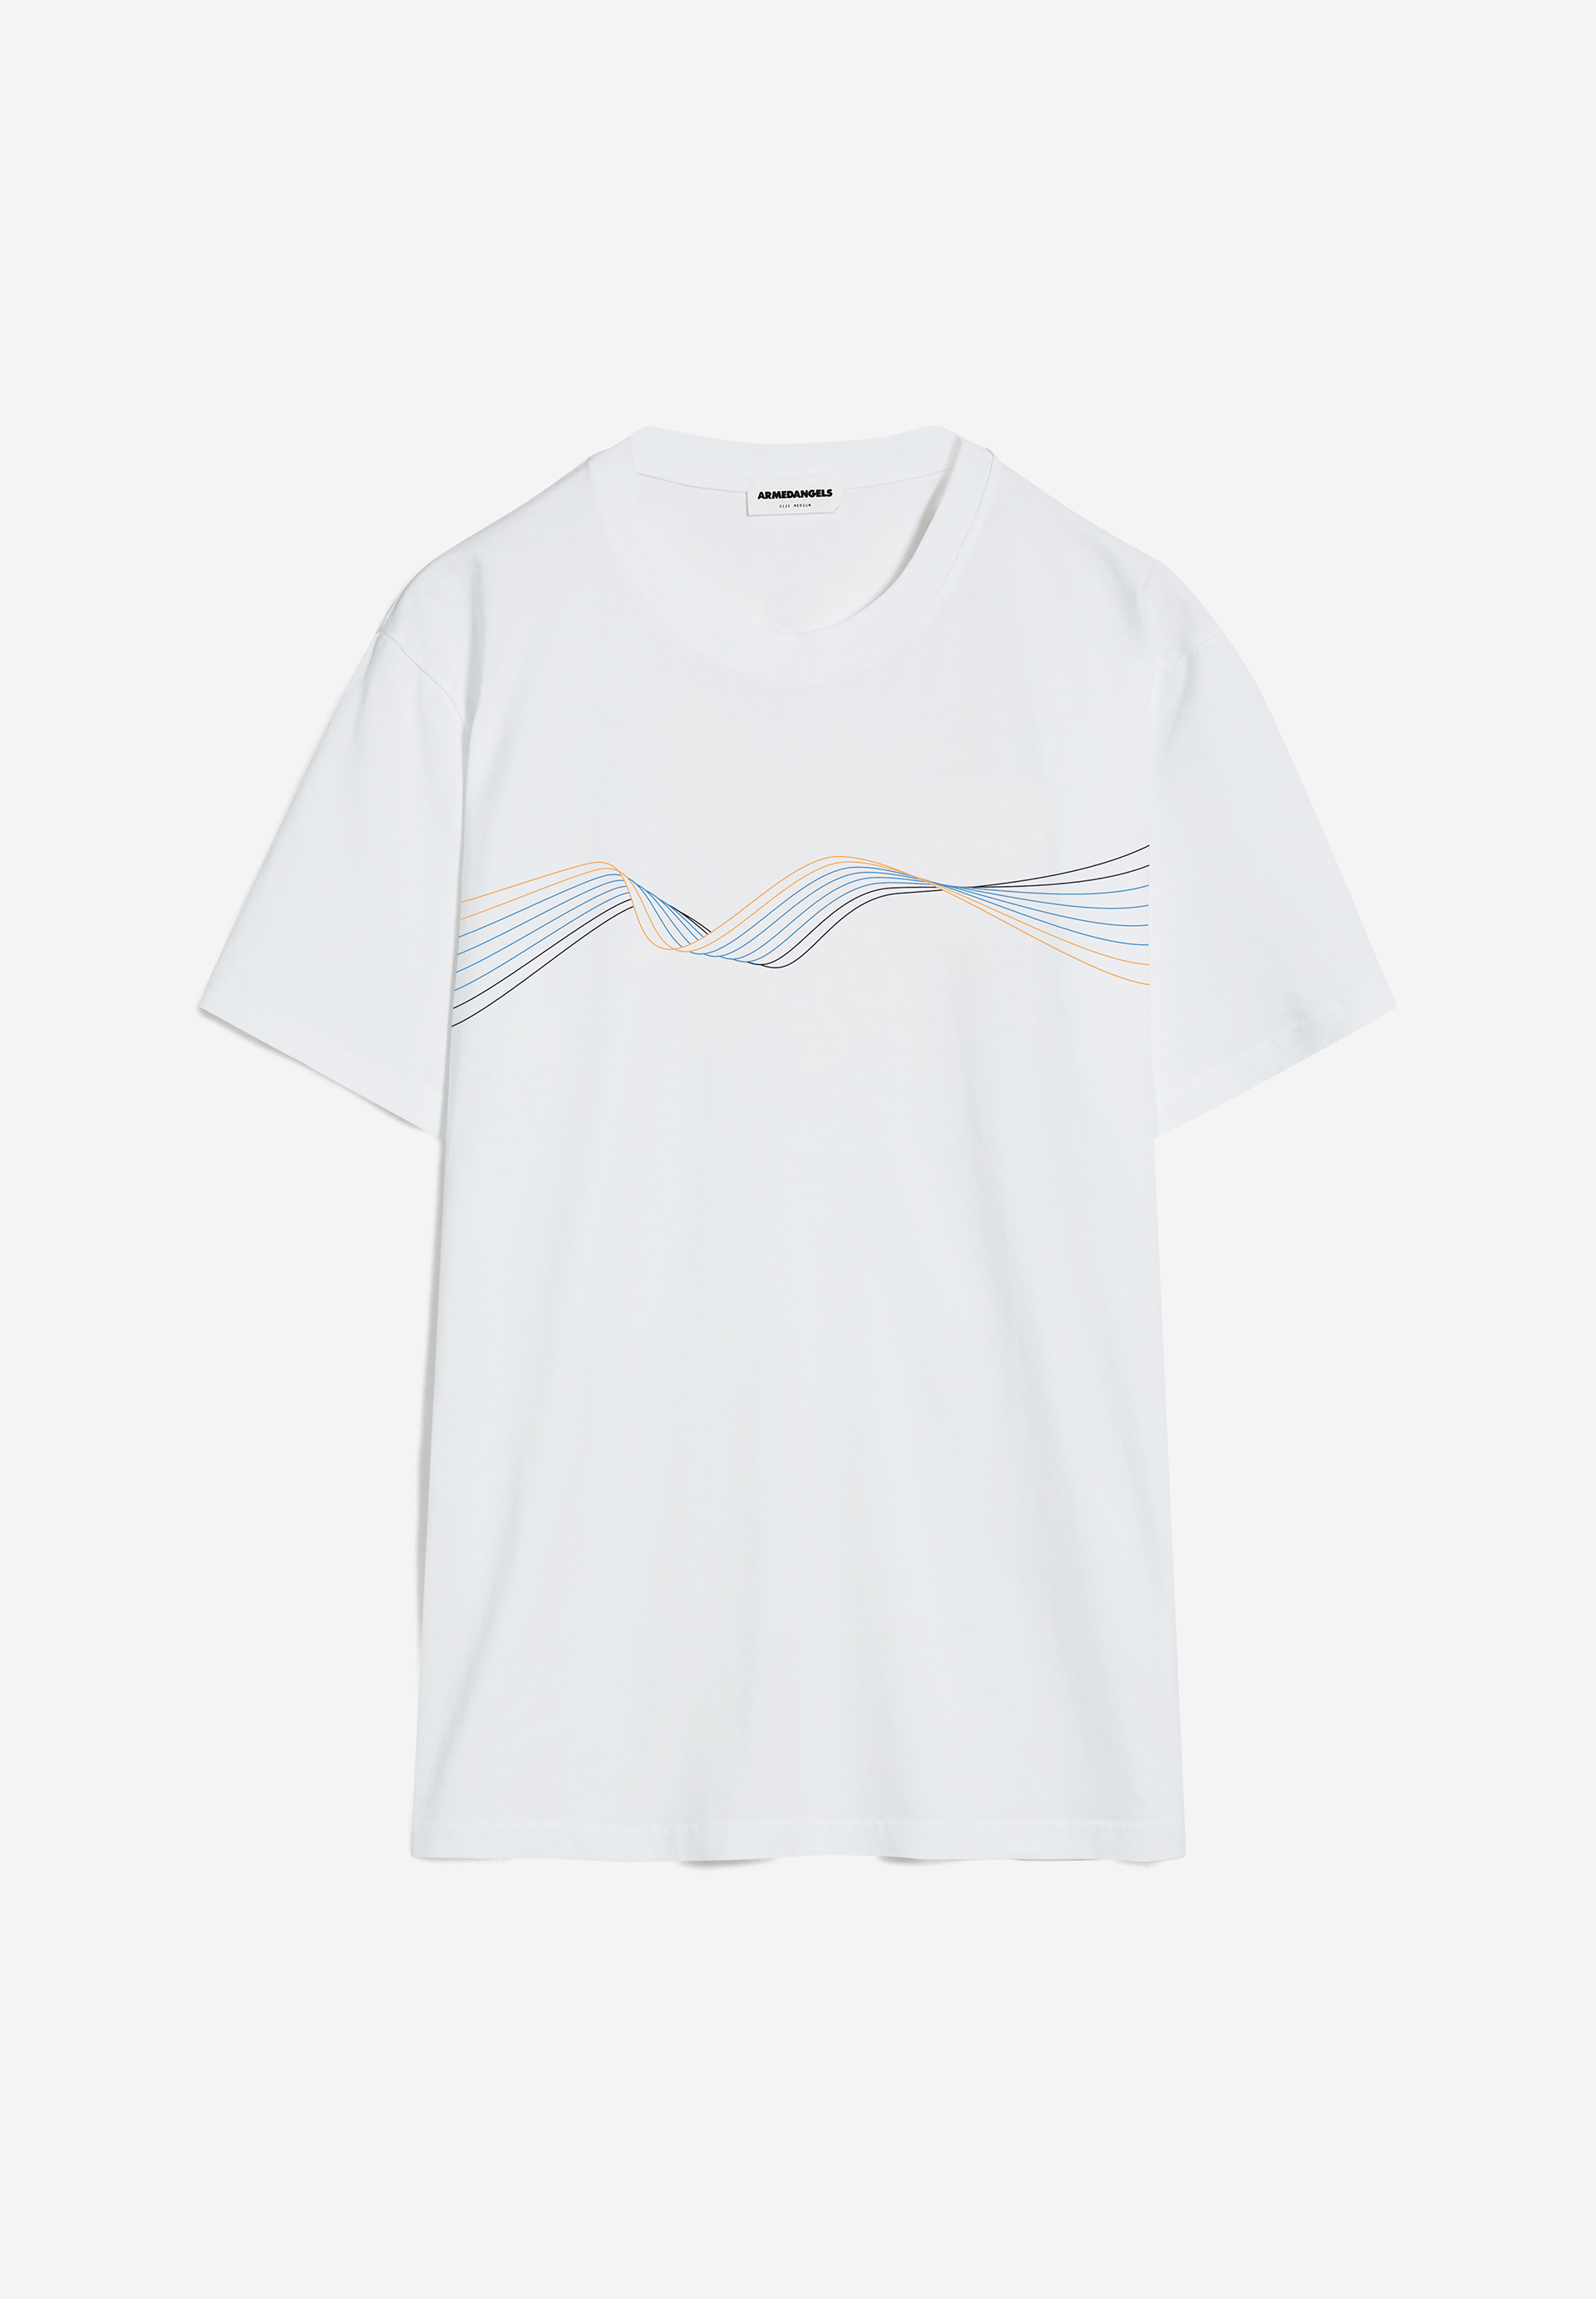 AADONI WAVE T-Shirt Relaxed Fit made of Organic Cotton